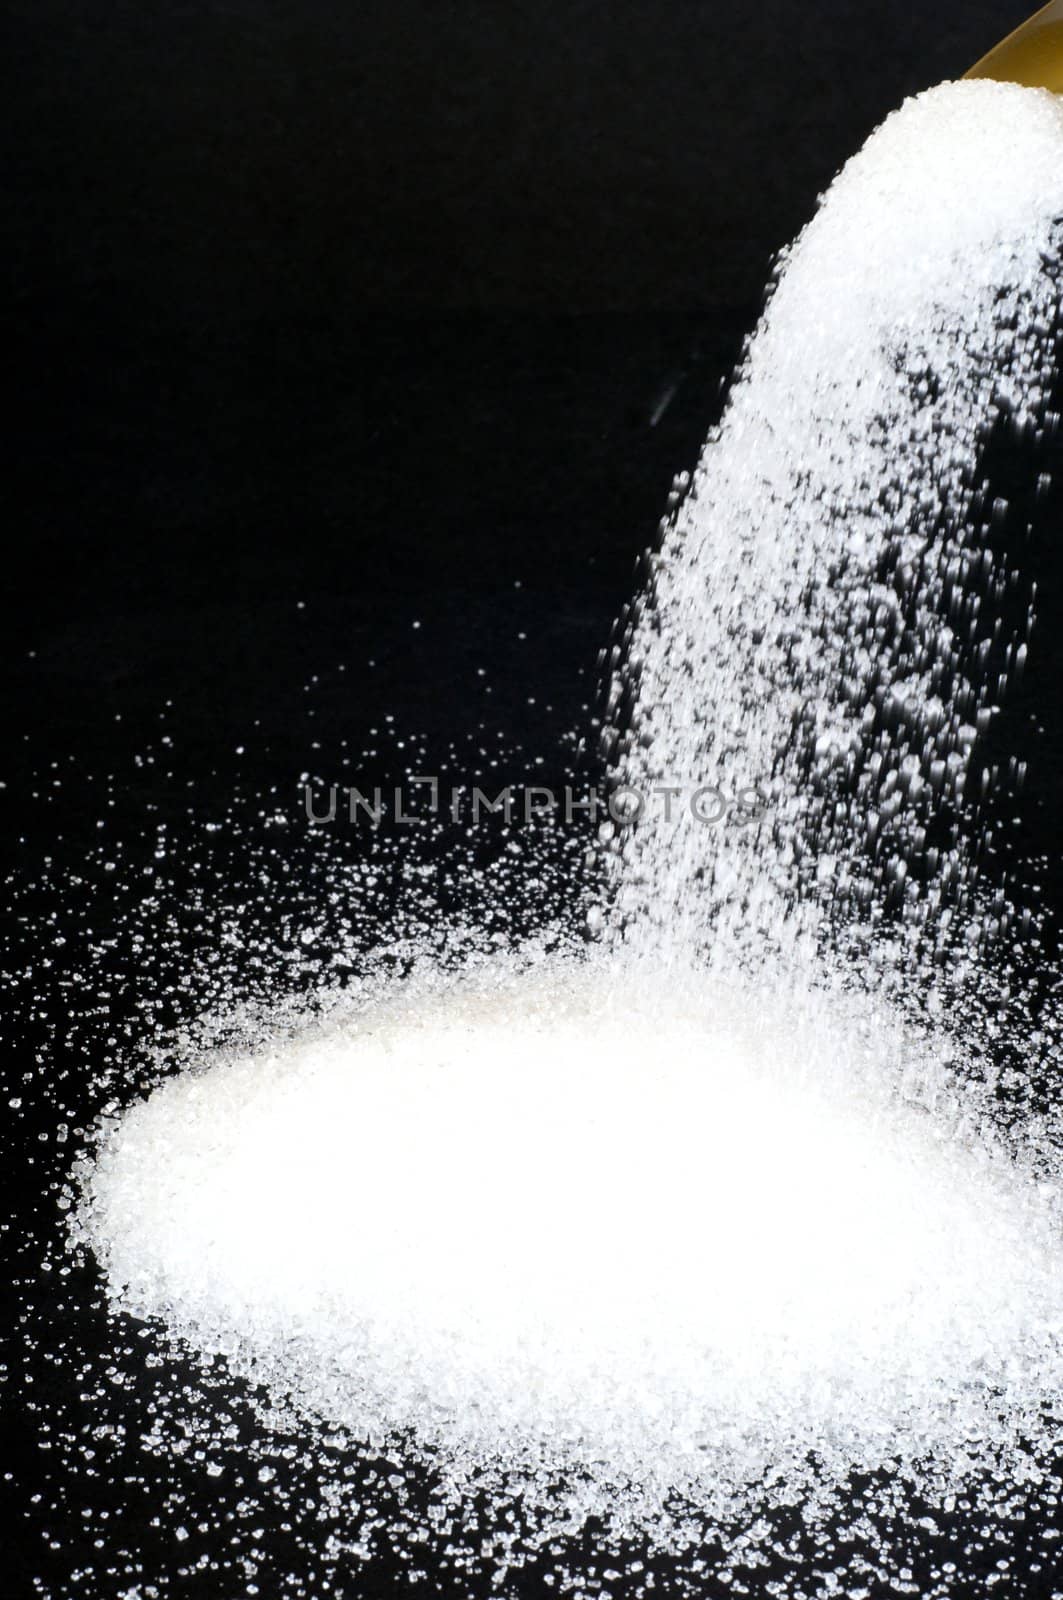 Sugar poured on a black background